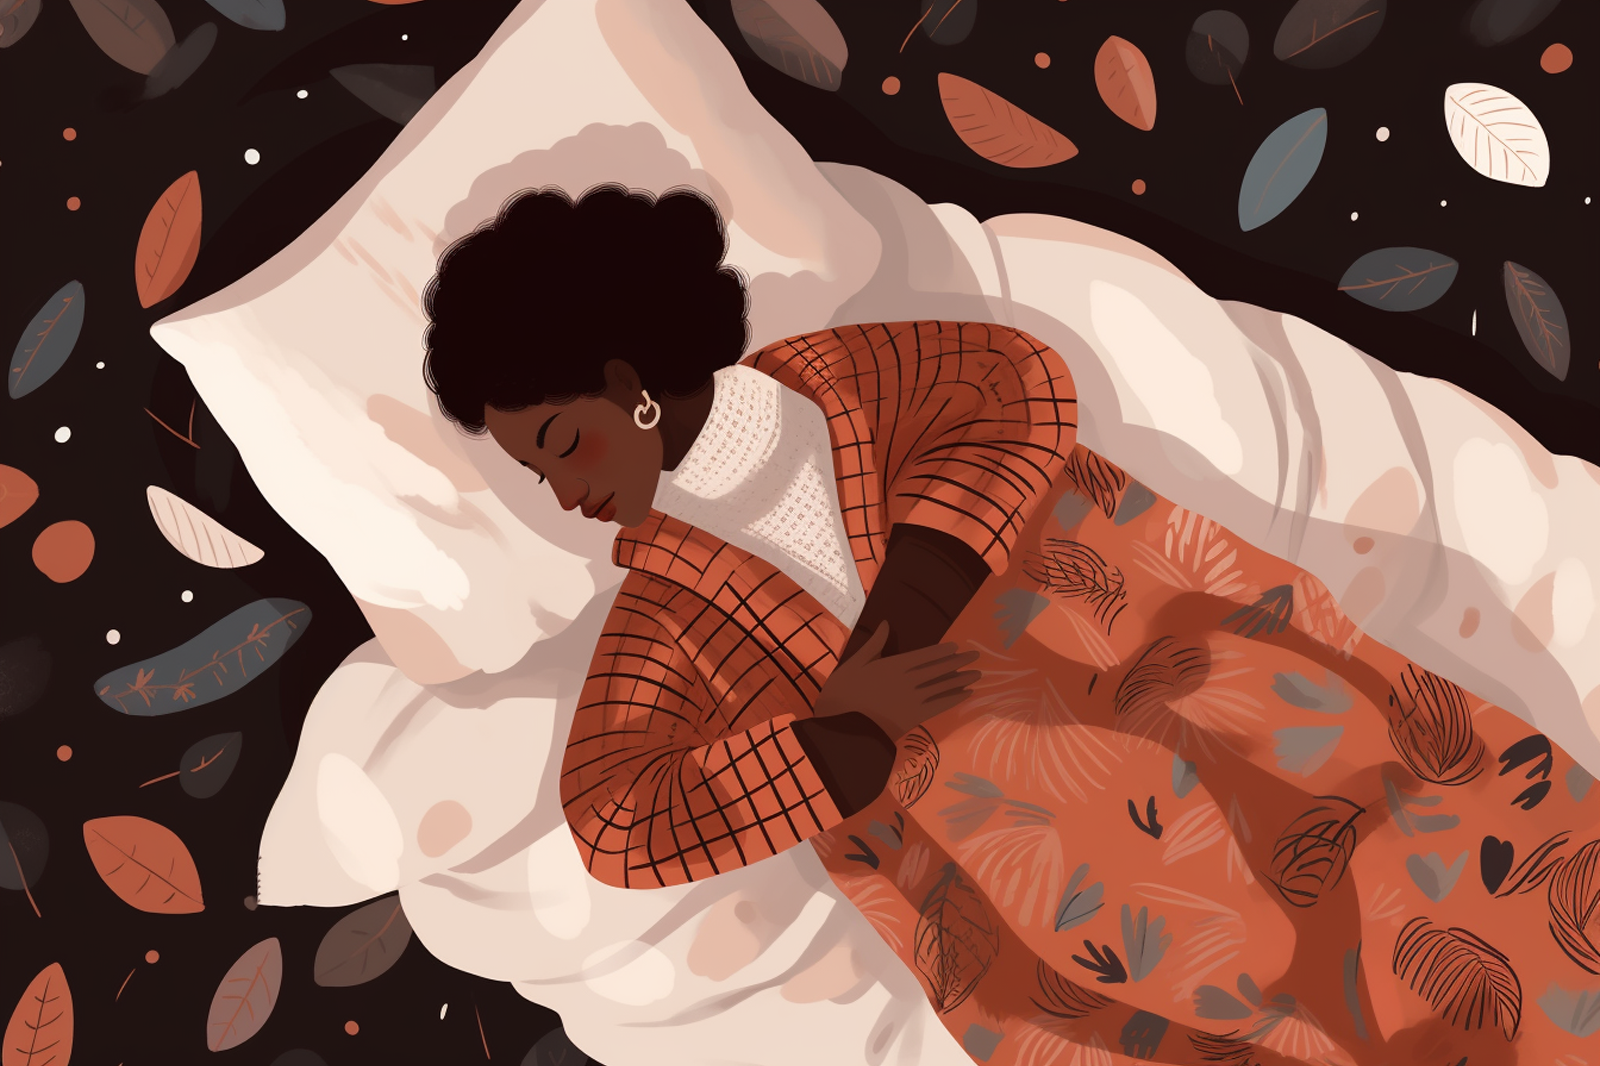 A lady peacefully asleep on a bed, covered with a blanket, against a chocolate background with tree leaves